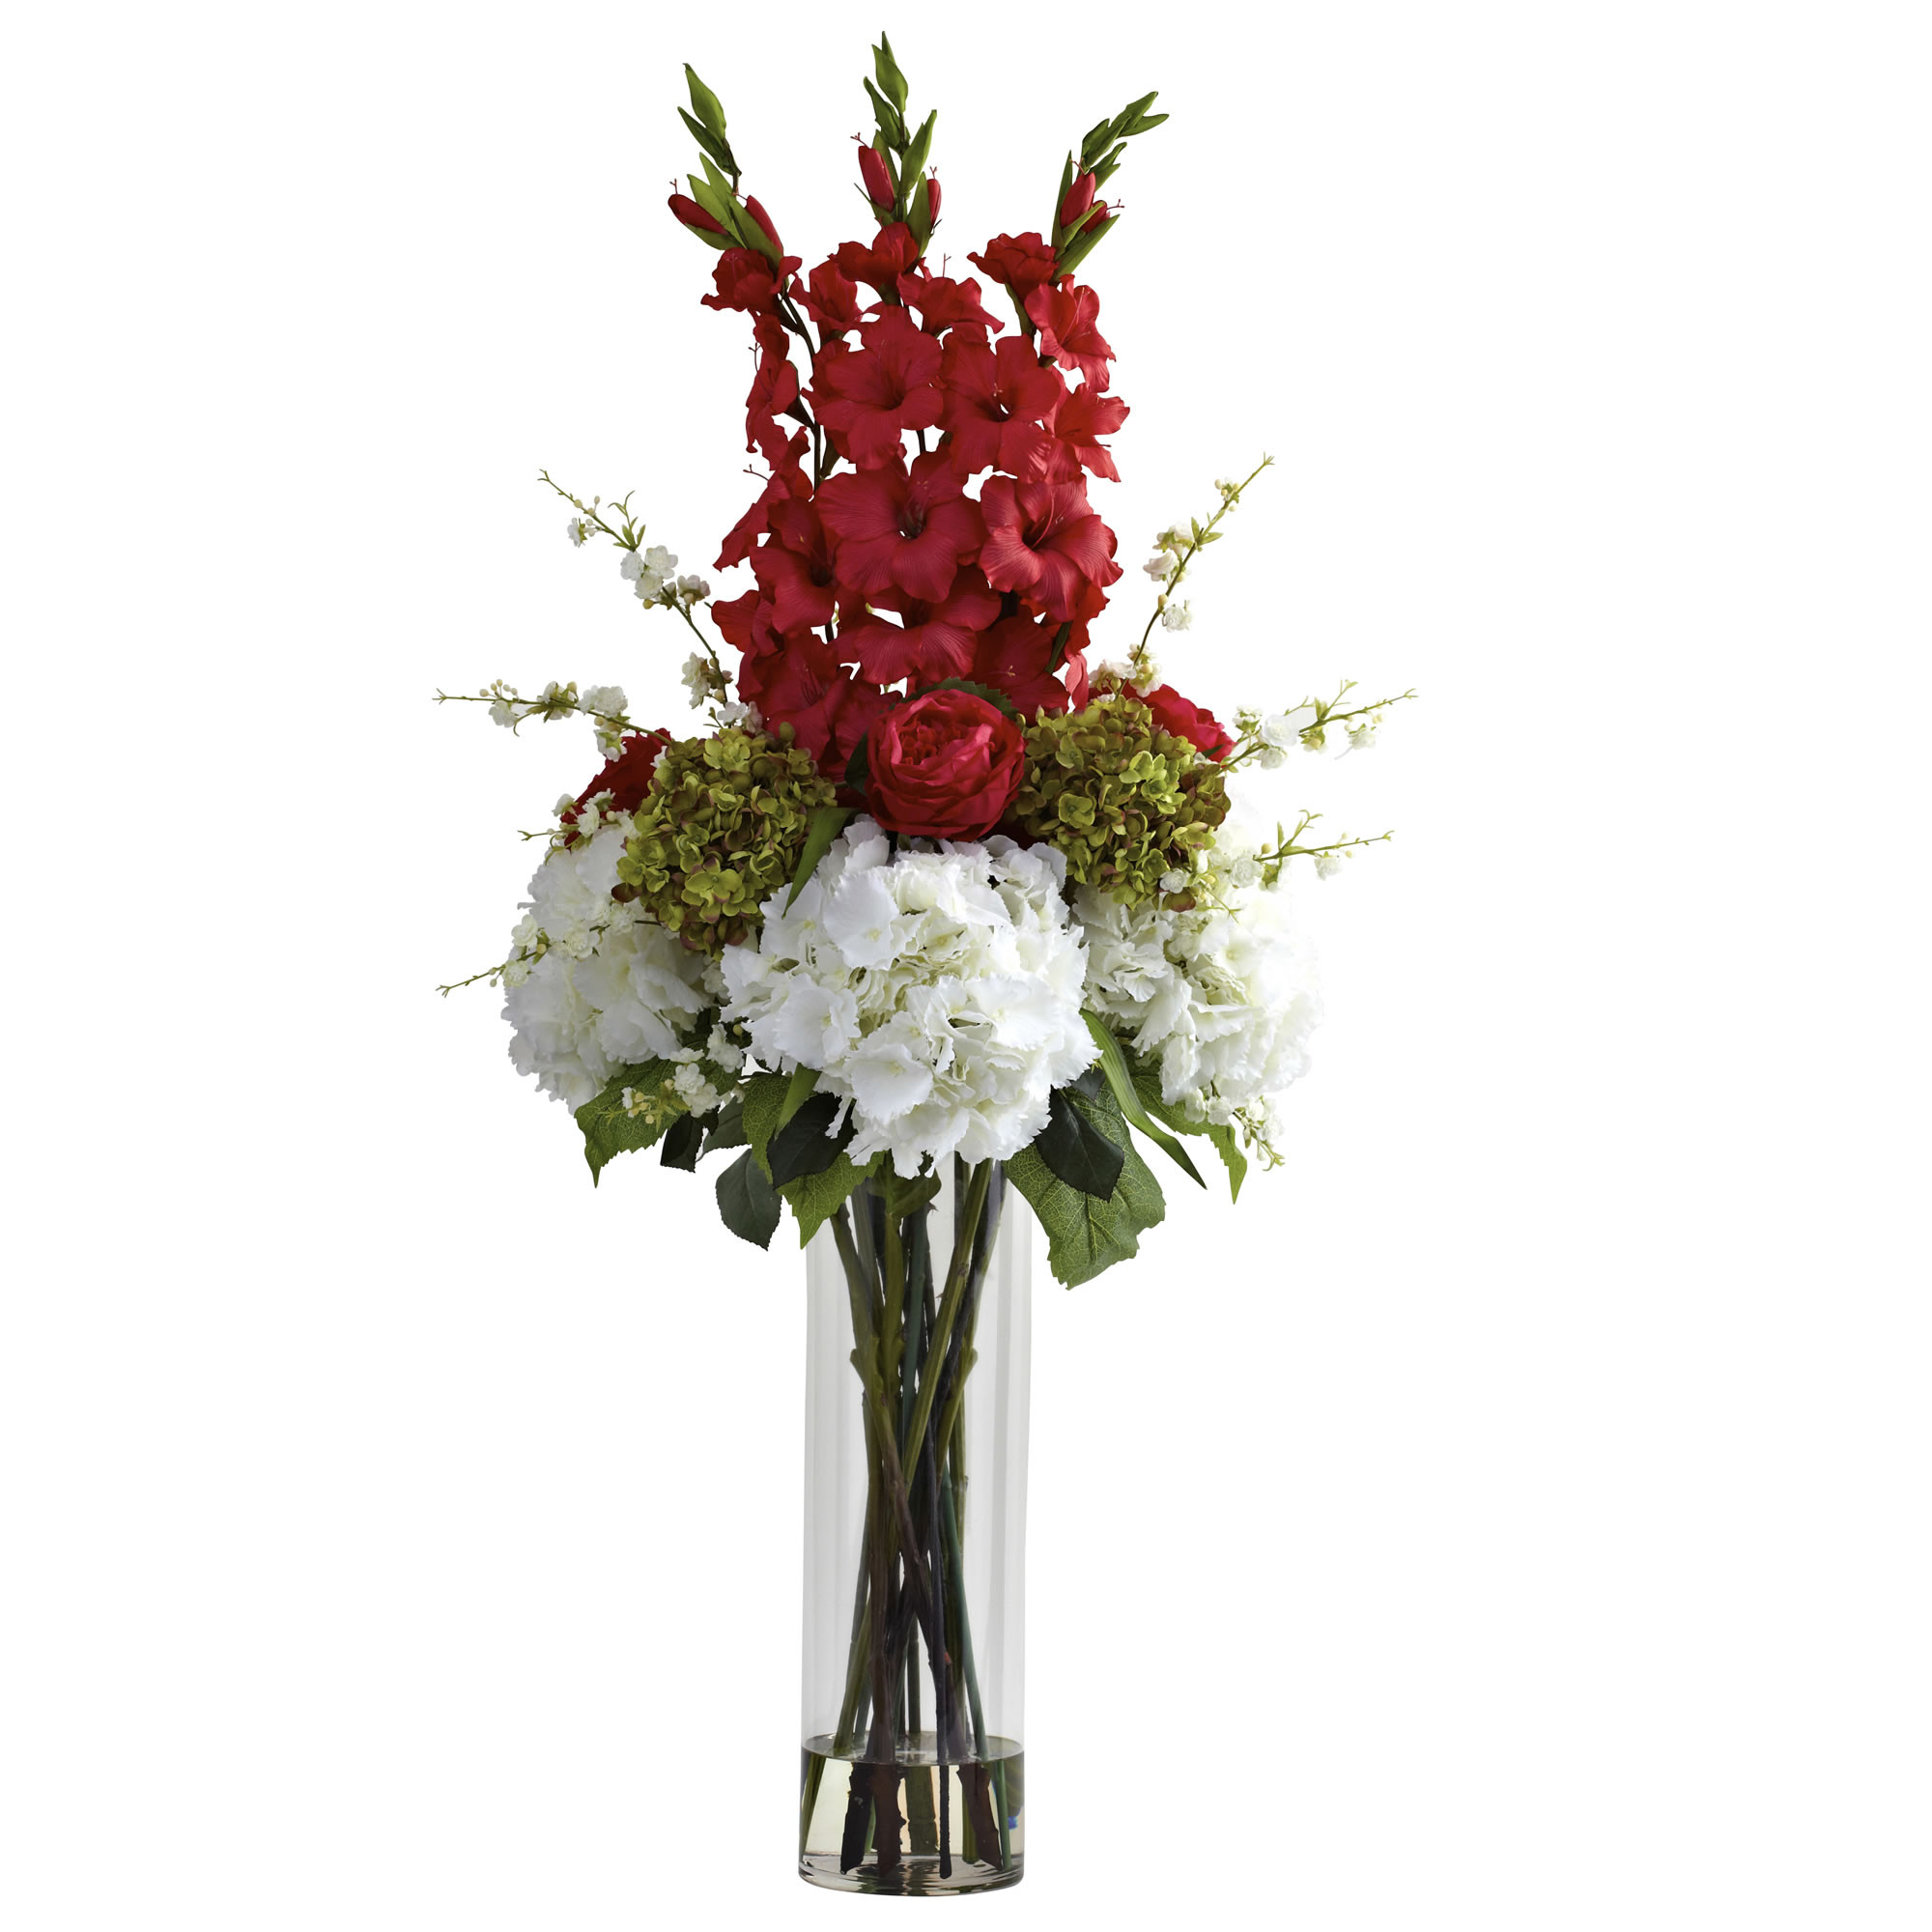 25 Cute Tall Thin Vase Cheap 2022 free download tall thin vase cheap of flower arrangements in tall thin vases flowers healthy inside 48 inch silk giant mixed fl arrangement in vase multiple colors tall thin